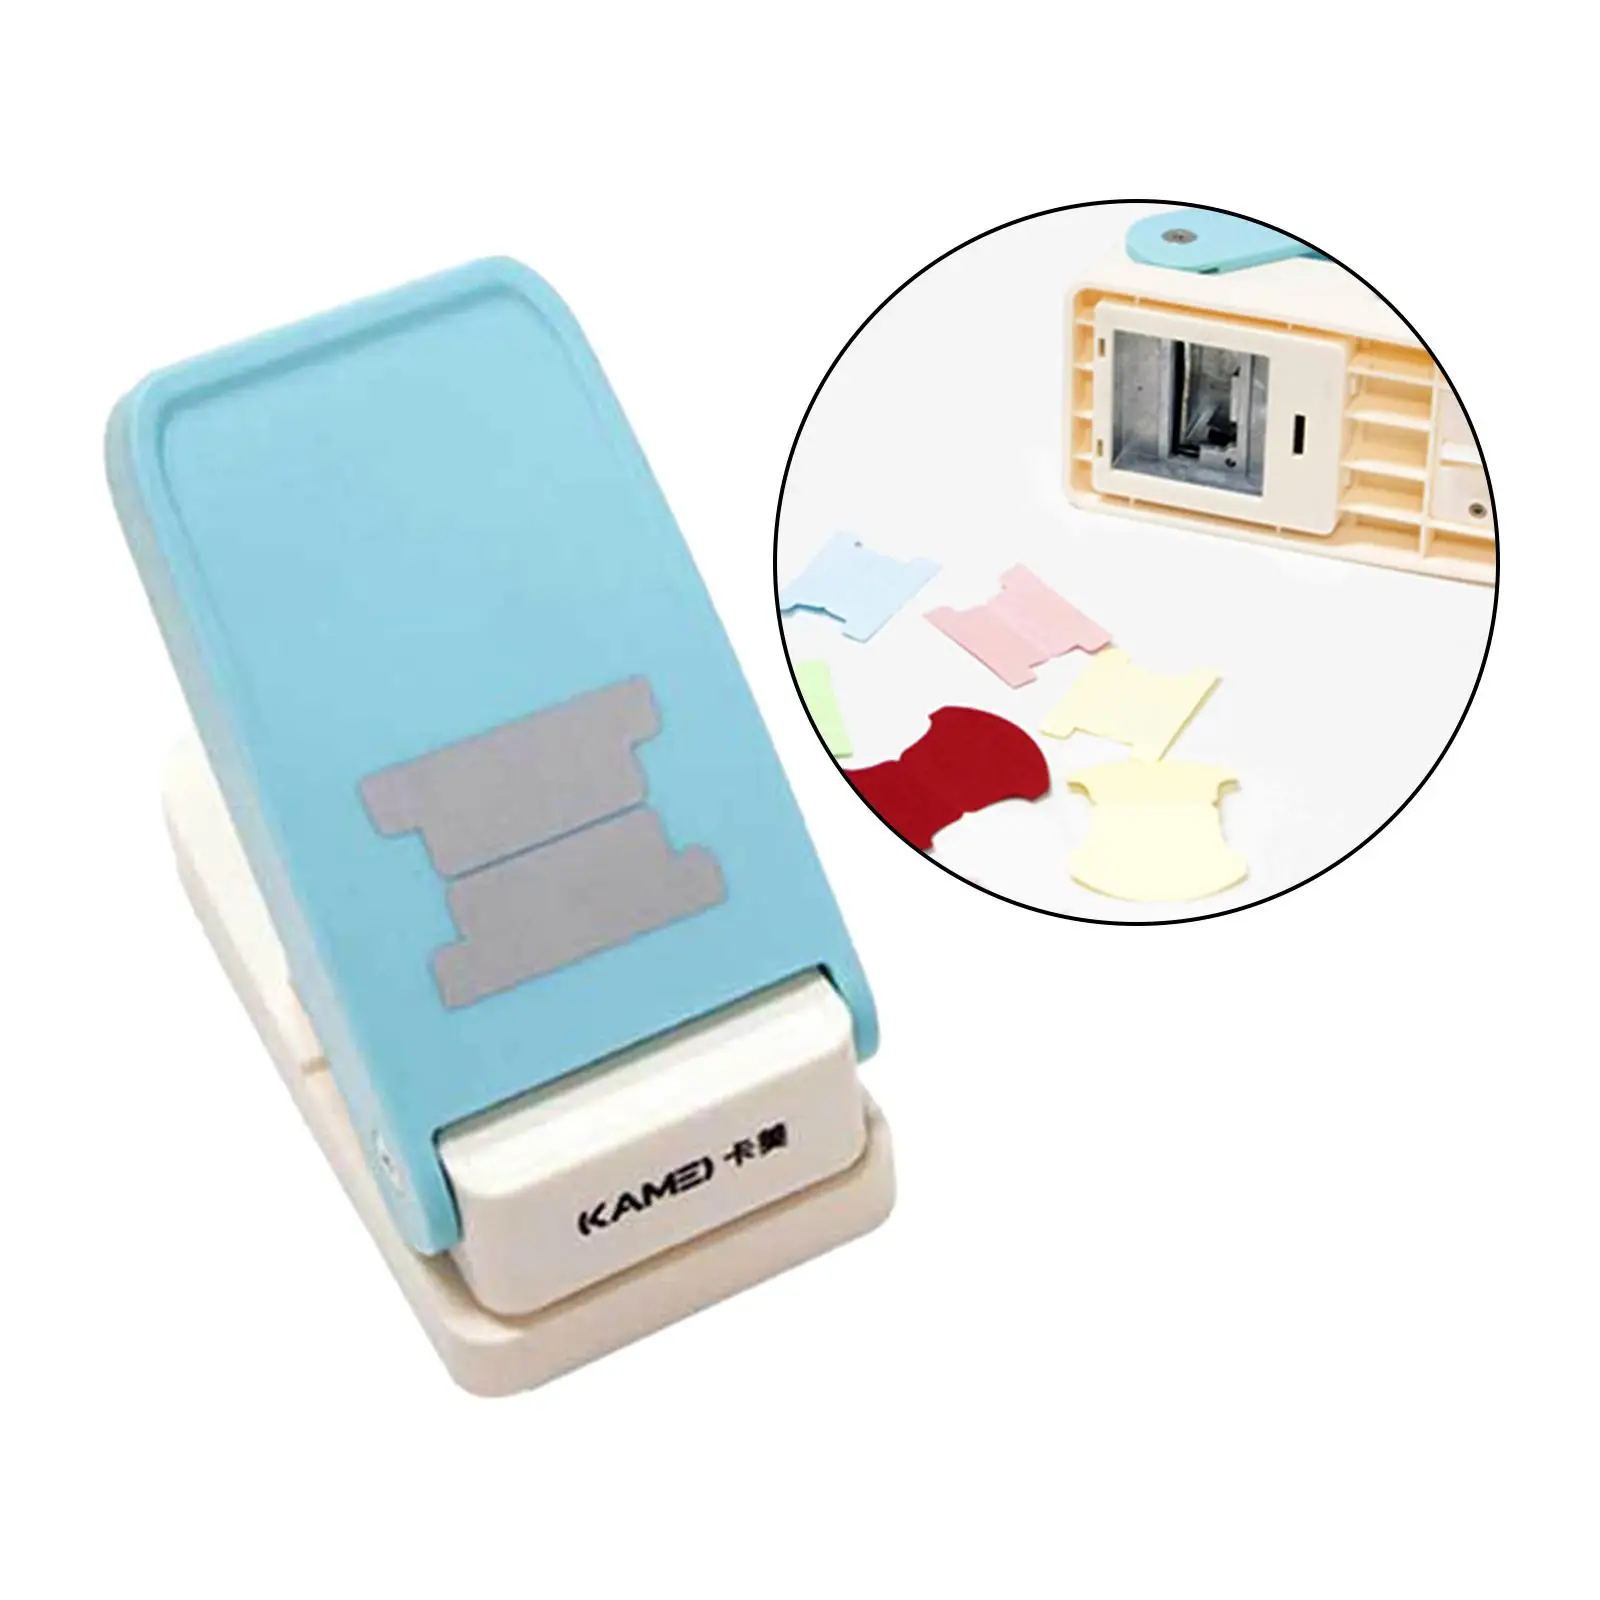 Tab Punch Handheld Index Tabs Puncher for Planner Inserts Sketchbook Paper Classification File Self Made Index Label Notebook